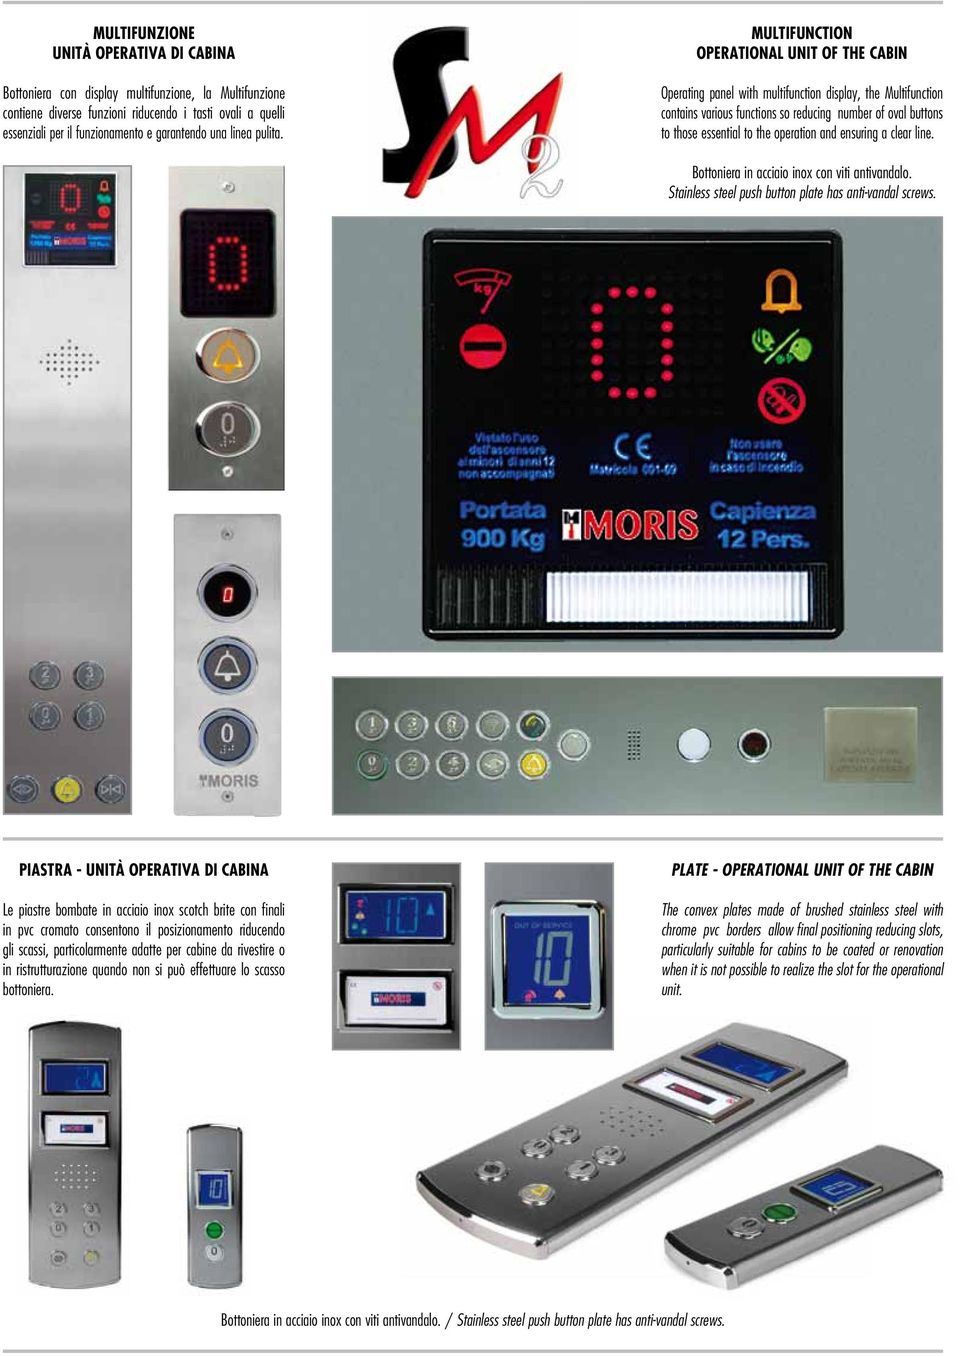 Multifunction Operational unit of the cabin Operating panel with multifunction display, the Multifunction contains various functions so reducing number of oval buttons to those essential to the